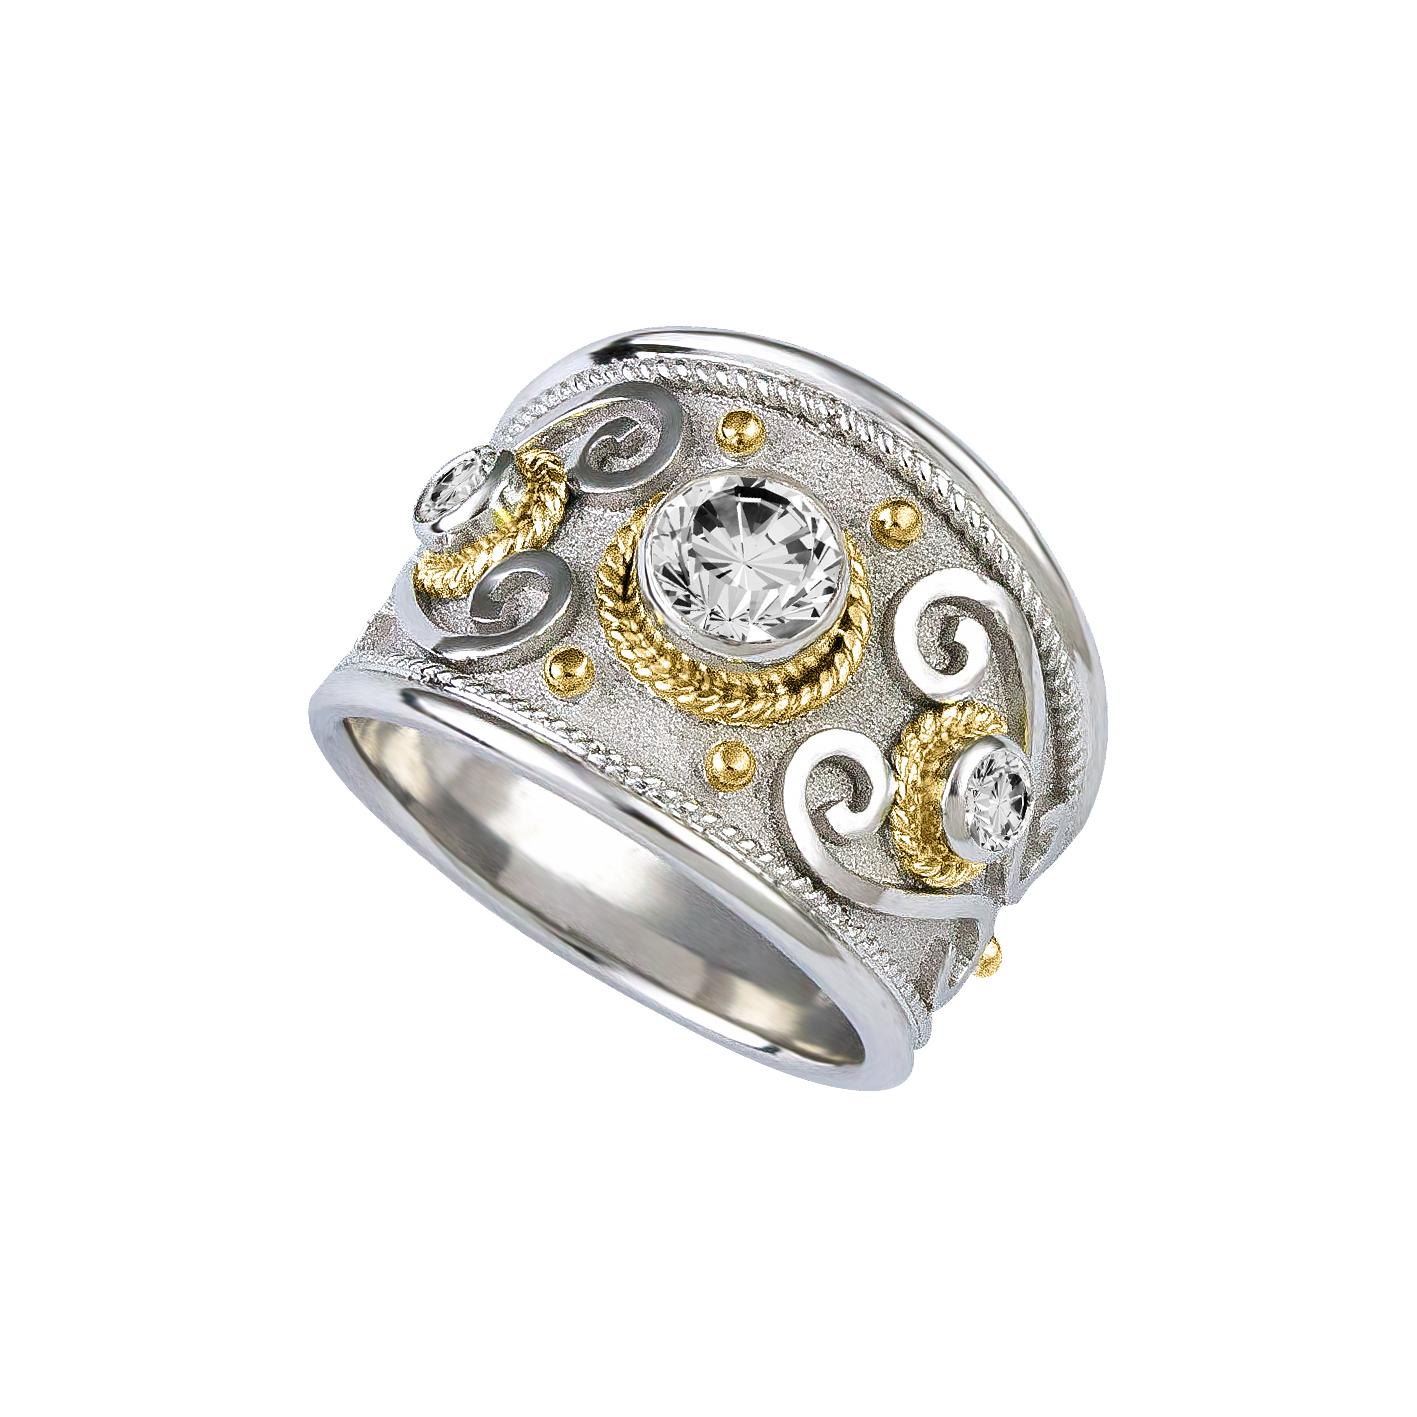 S.Georgios designer Two-Tone 18 Karat solid white gold ring all handmade with Byzantine-style granulation in 18 Karat white and yellow gold and a unique velvet background. This gorgeous ring features 3 Brilliant cut White Diamonds - in the center,